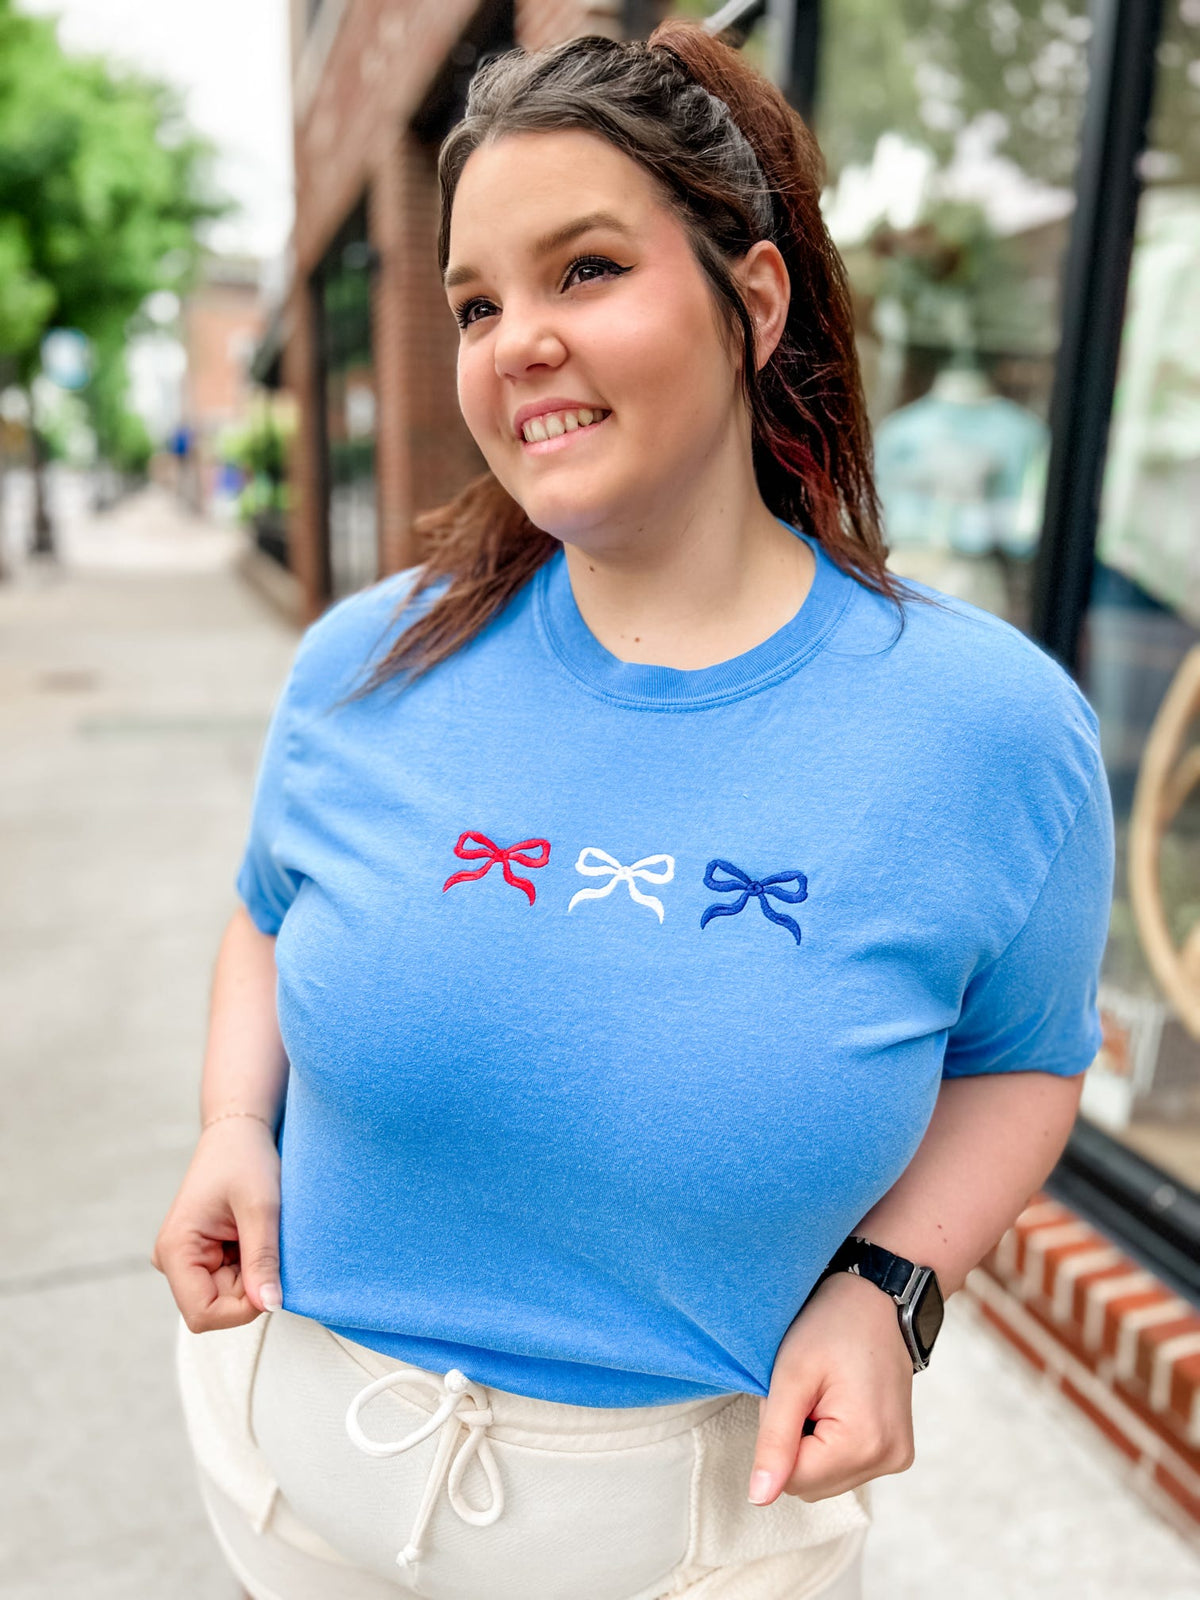 Patriotic Bows Embroidered Tee-130 Graphic T's-Peachy Keen Boutique-Peachy Keen Boutique, Women's Fashion Boutique, Located in Cape Girardeau and Dexter, MO